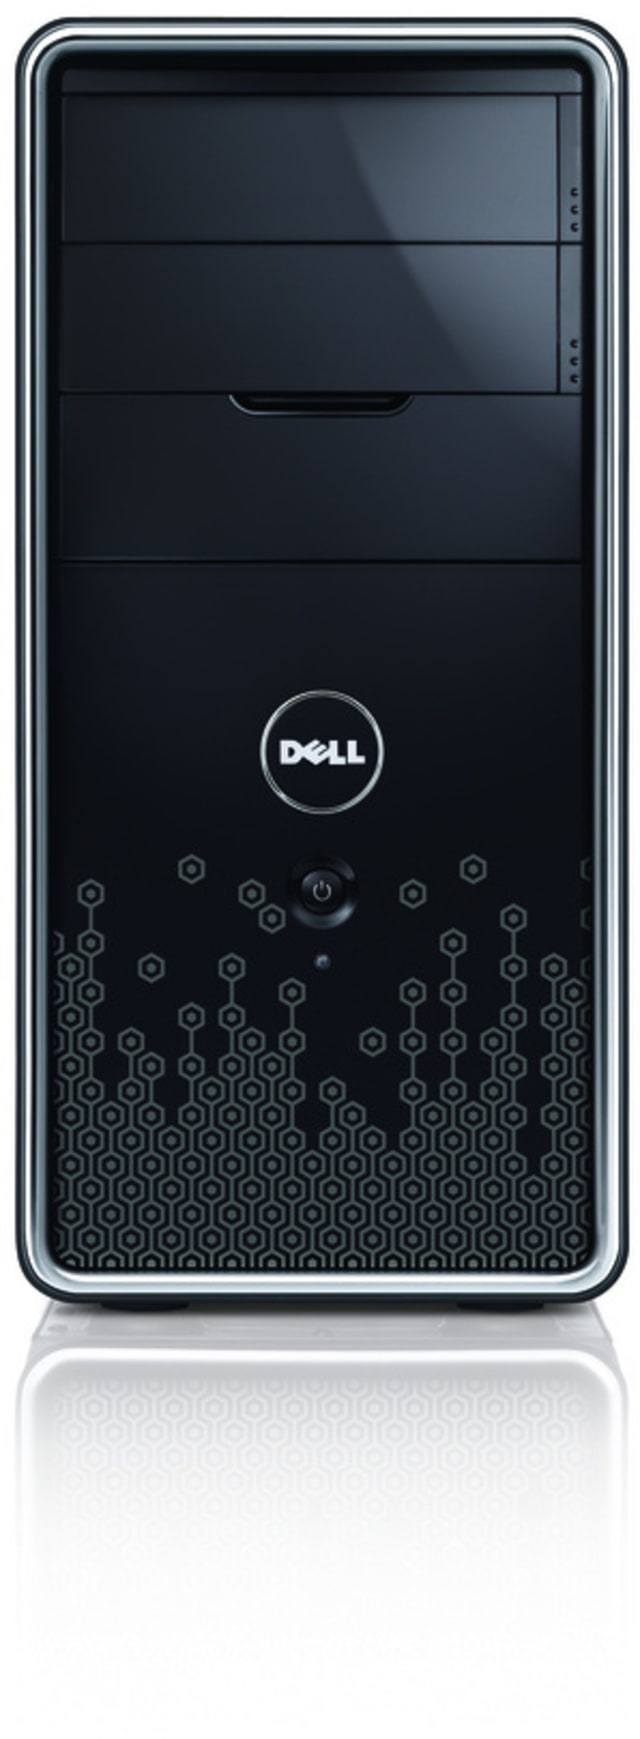 Dell Inspiron 580 Reviews Pricing Specs